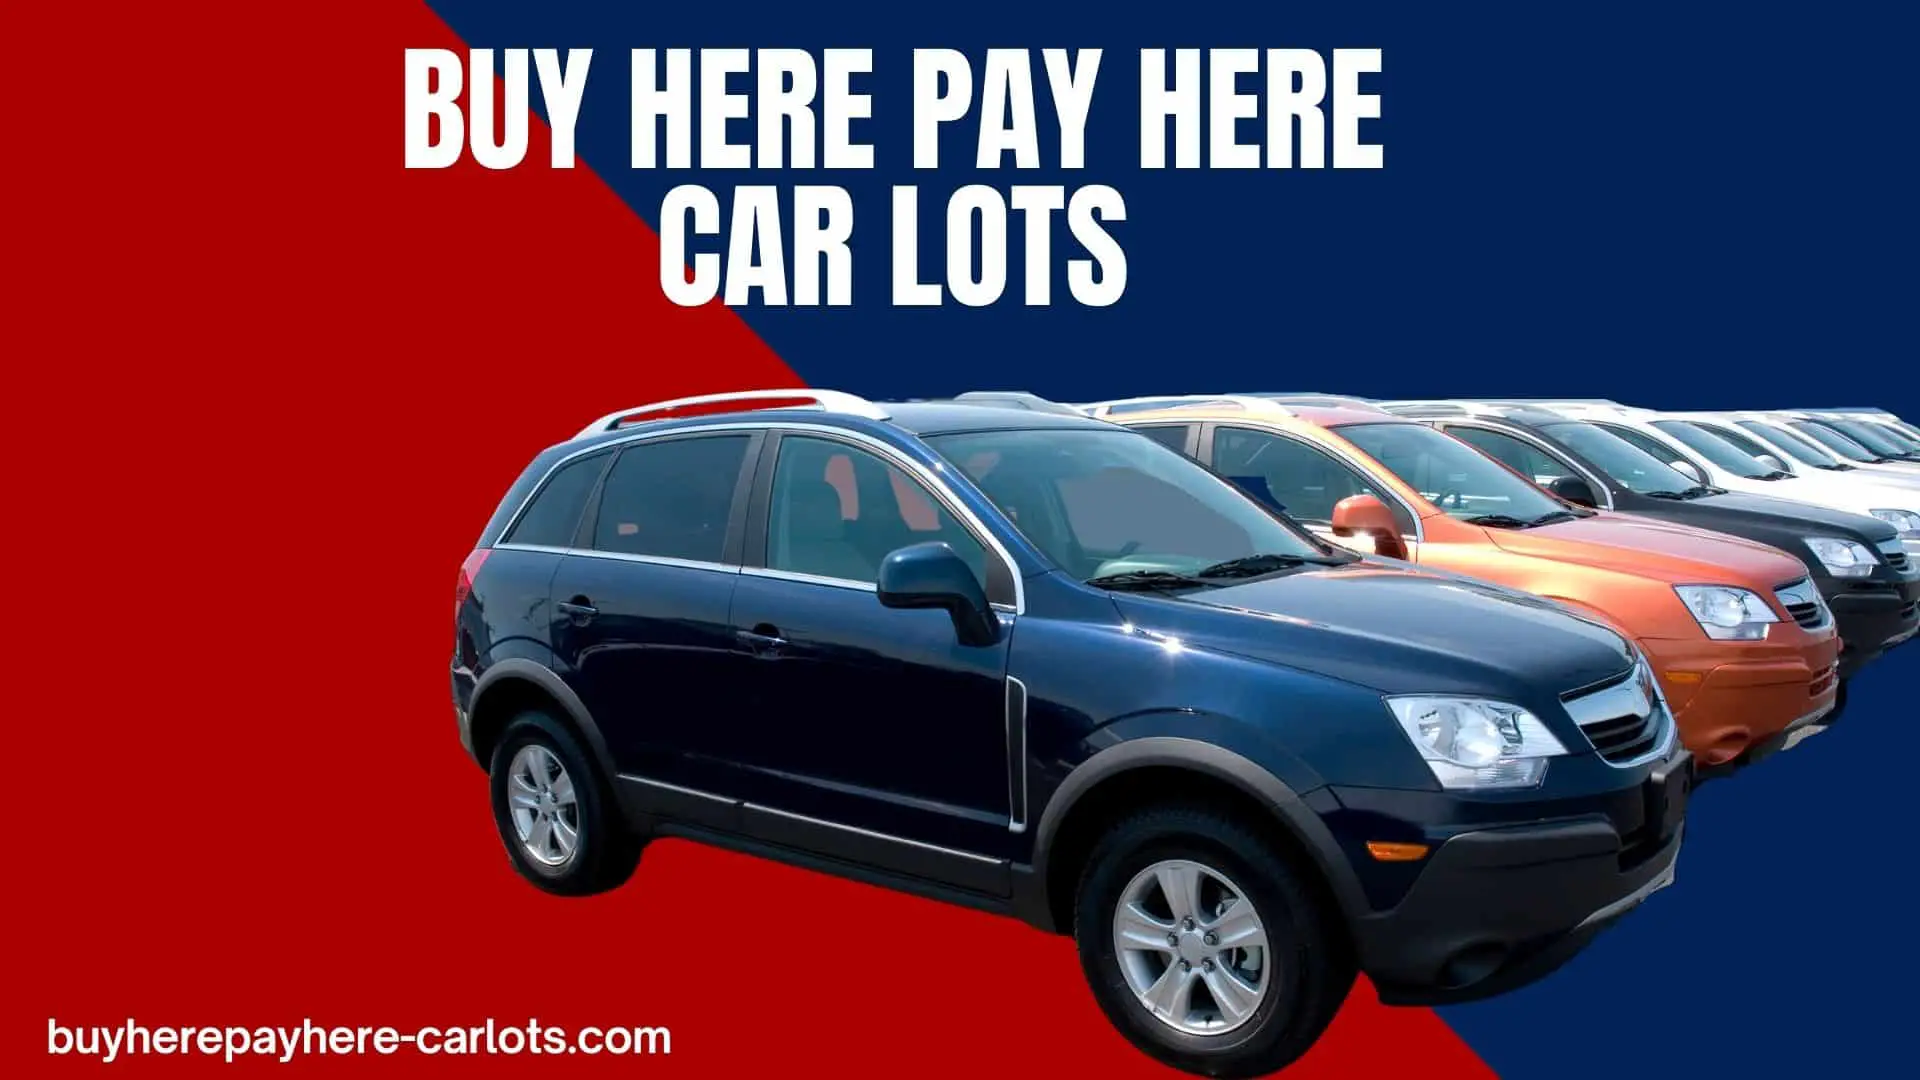 Best Buy Here Pay Here Car Lots & Dealers In The United States Near You